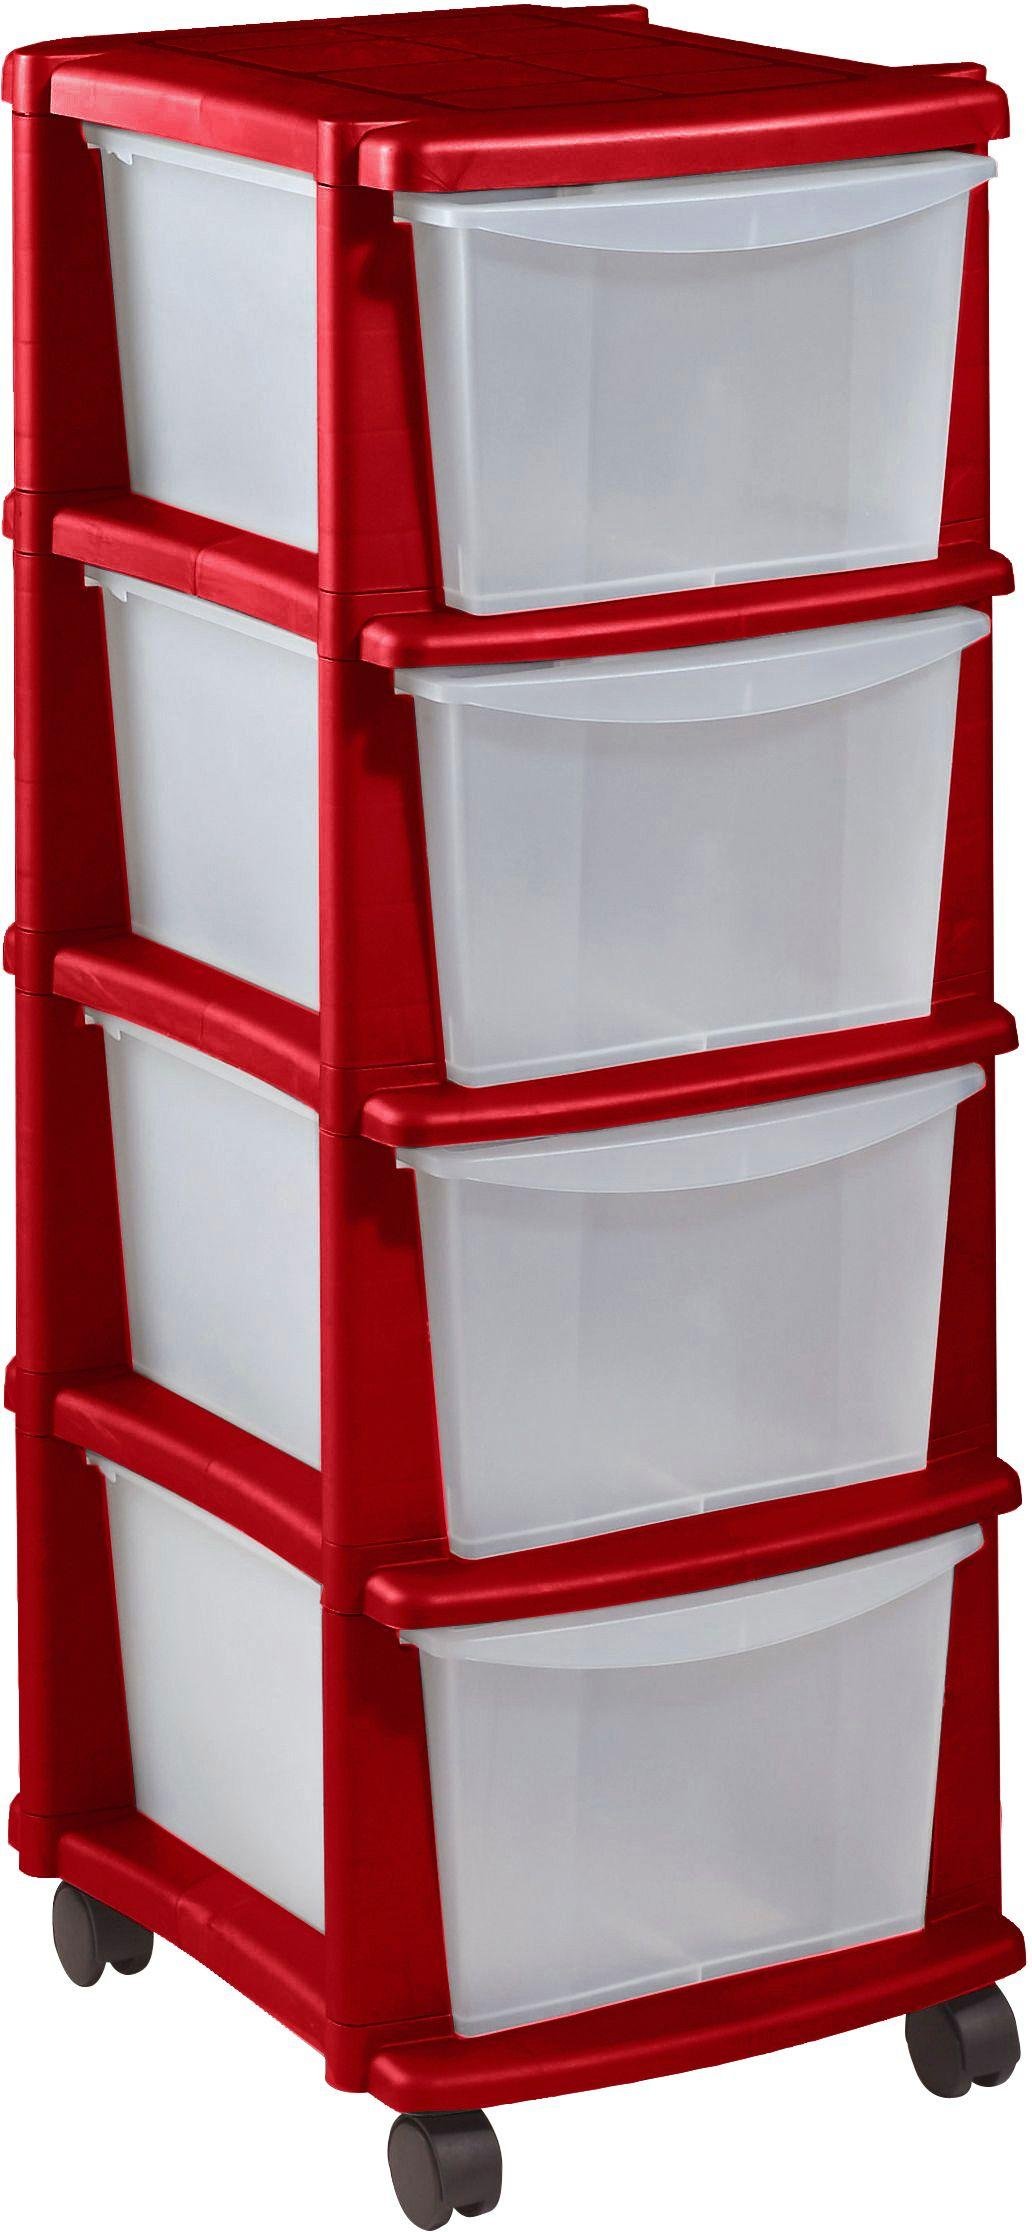 HOME 4 Drawer Red Plastic Tower Storage Unit